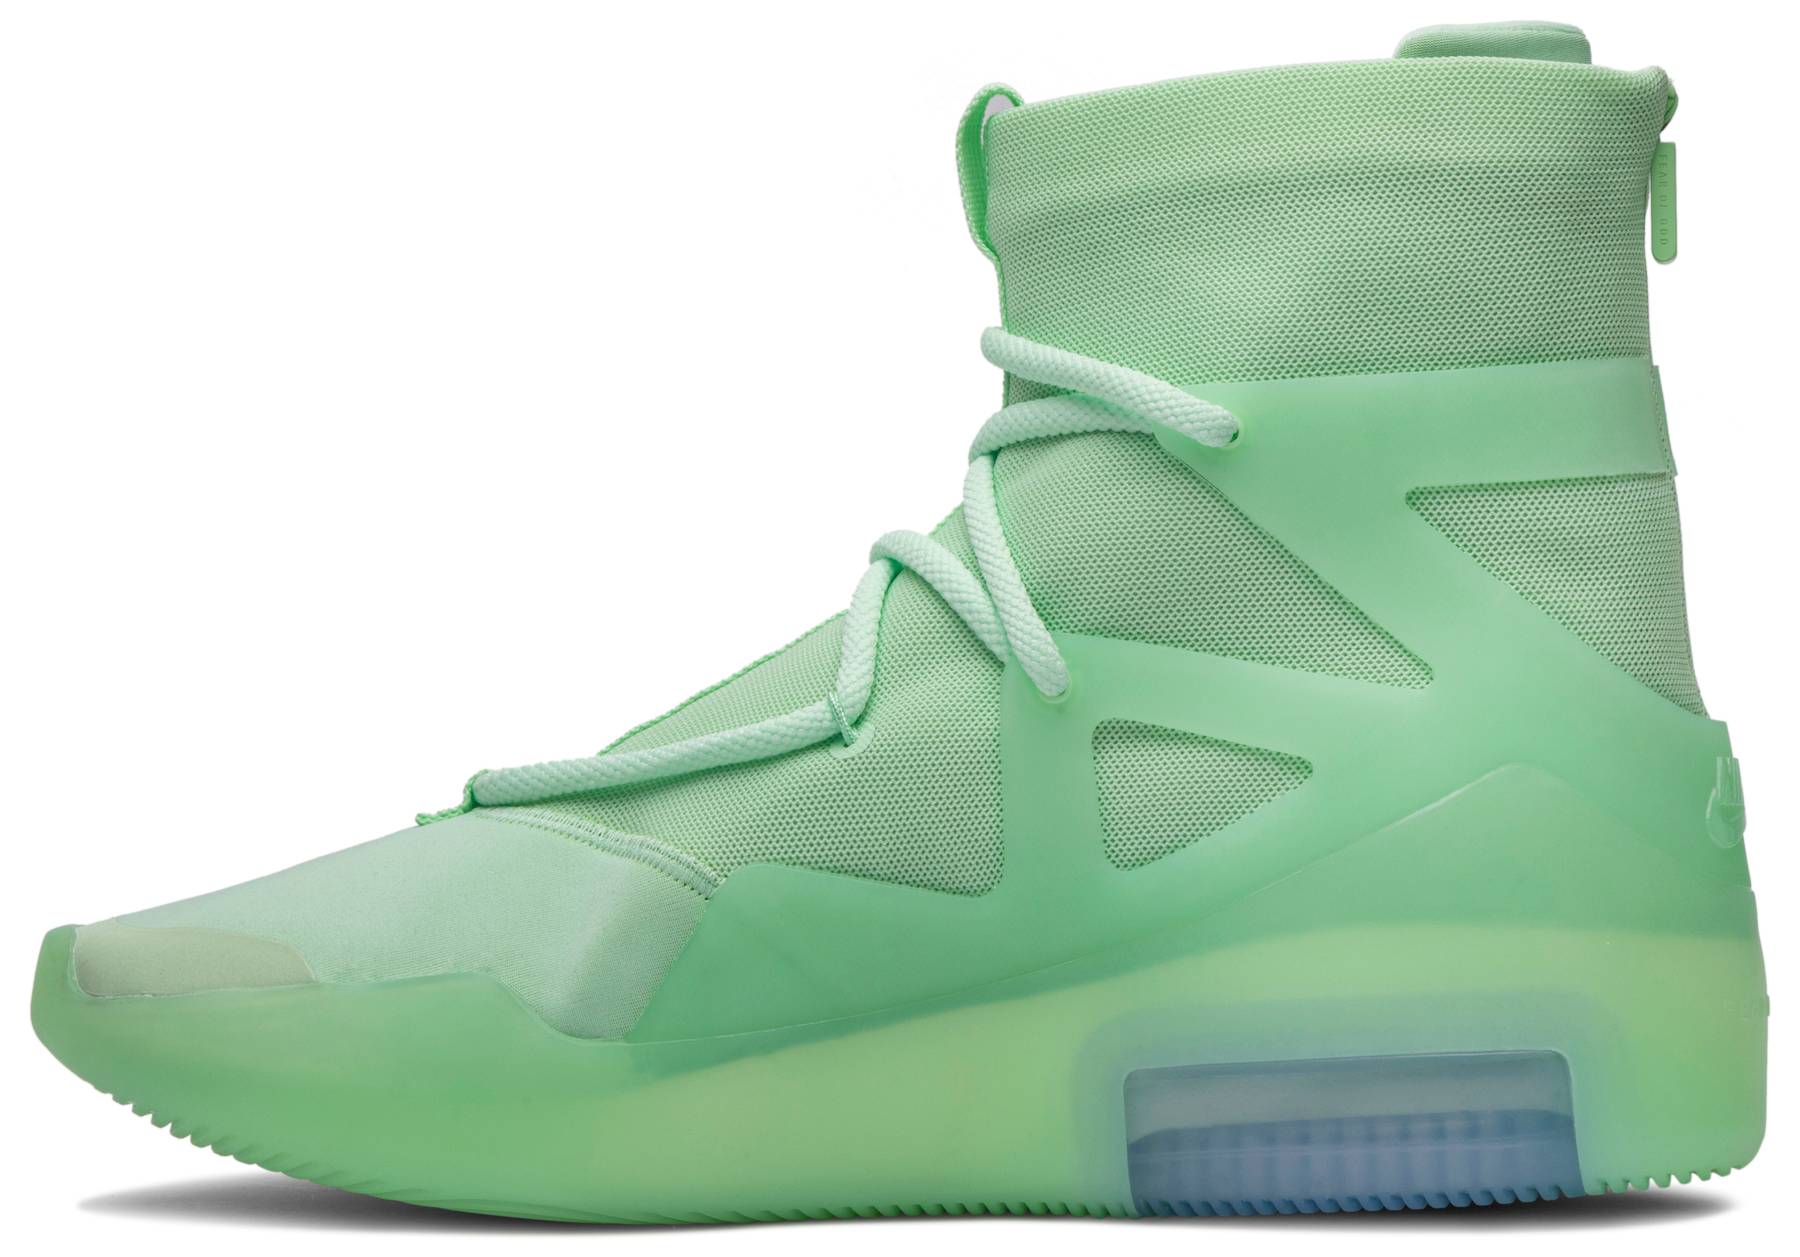 Air Fear Of God 1 'Frosted Spruce' - Nike - AR4237 300 | GOAT